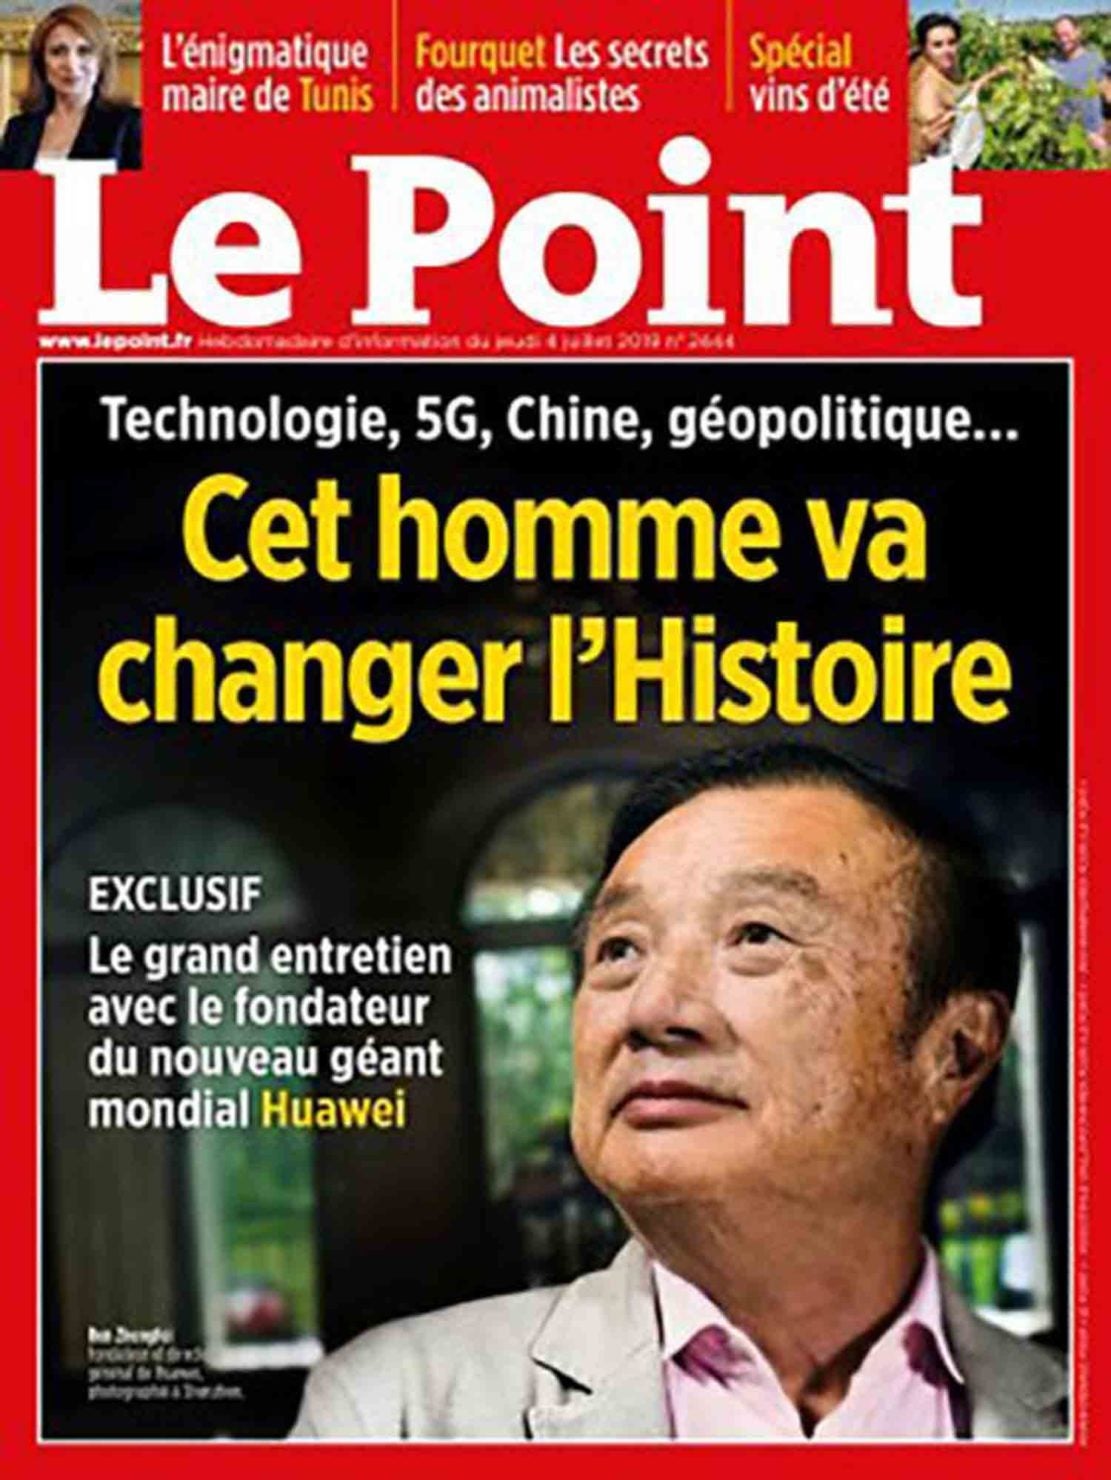 Huawei founder Ren Zhengfei was interviewed for a French magazine - HongMengOS is &quot;likely&quot; faster than Android and iOS says Huawei founder and CEO